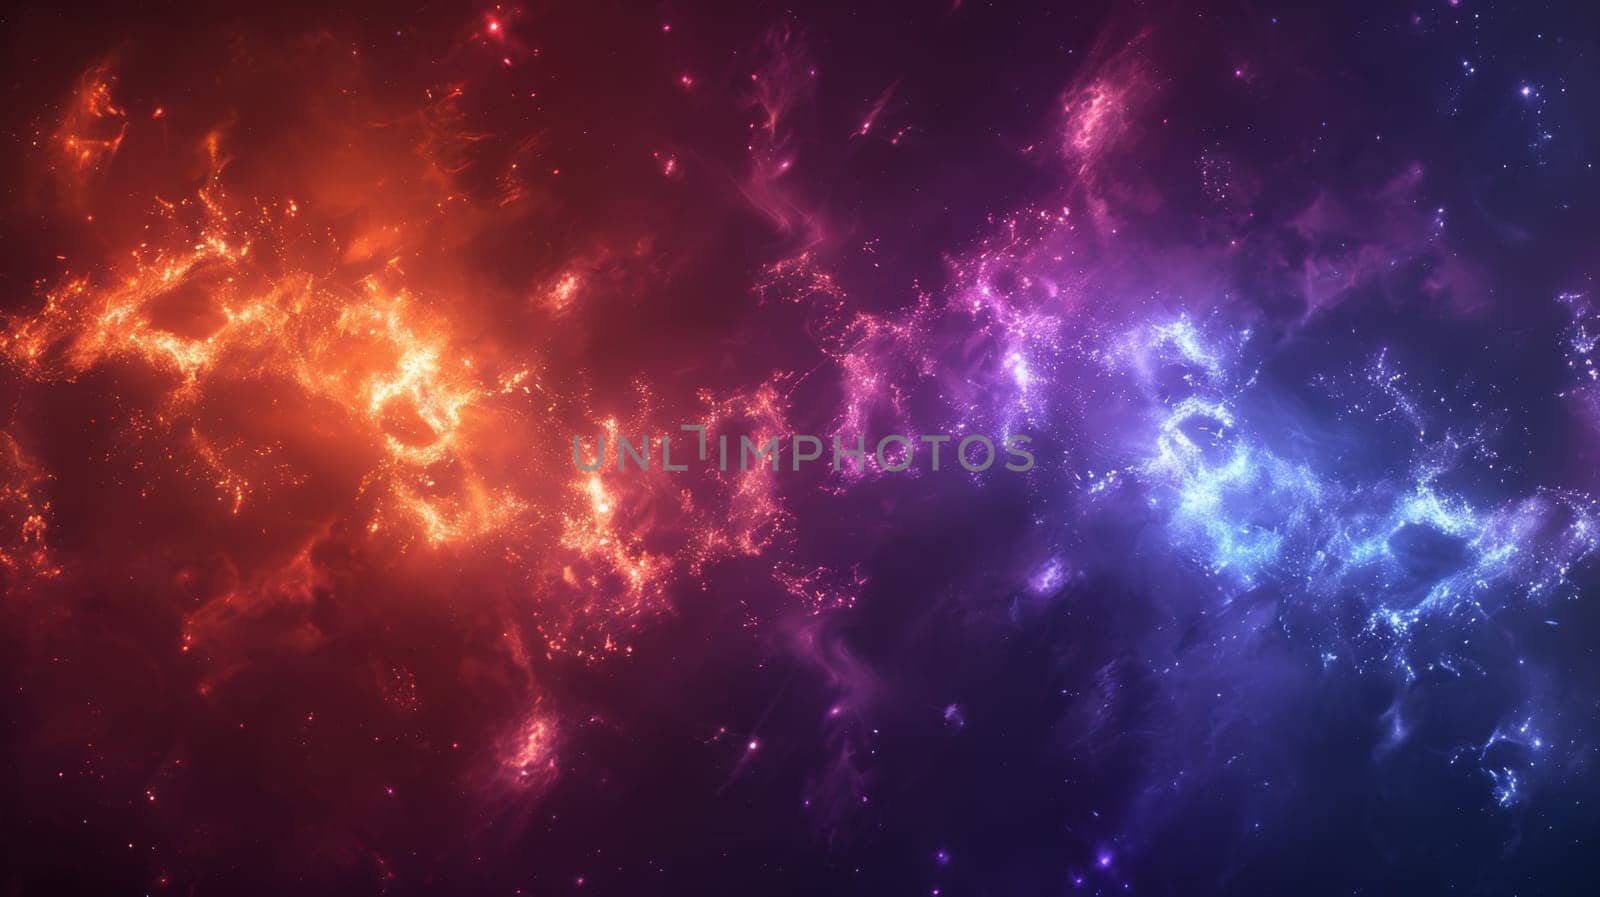 A colorful nebula with a bright blue and purple glow